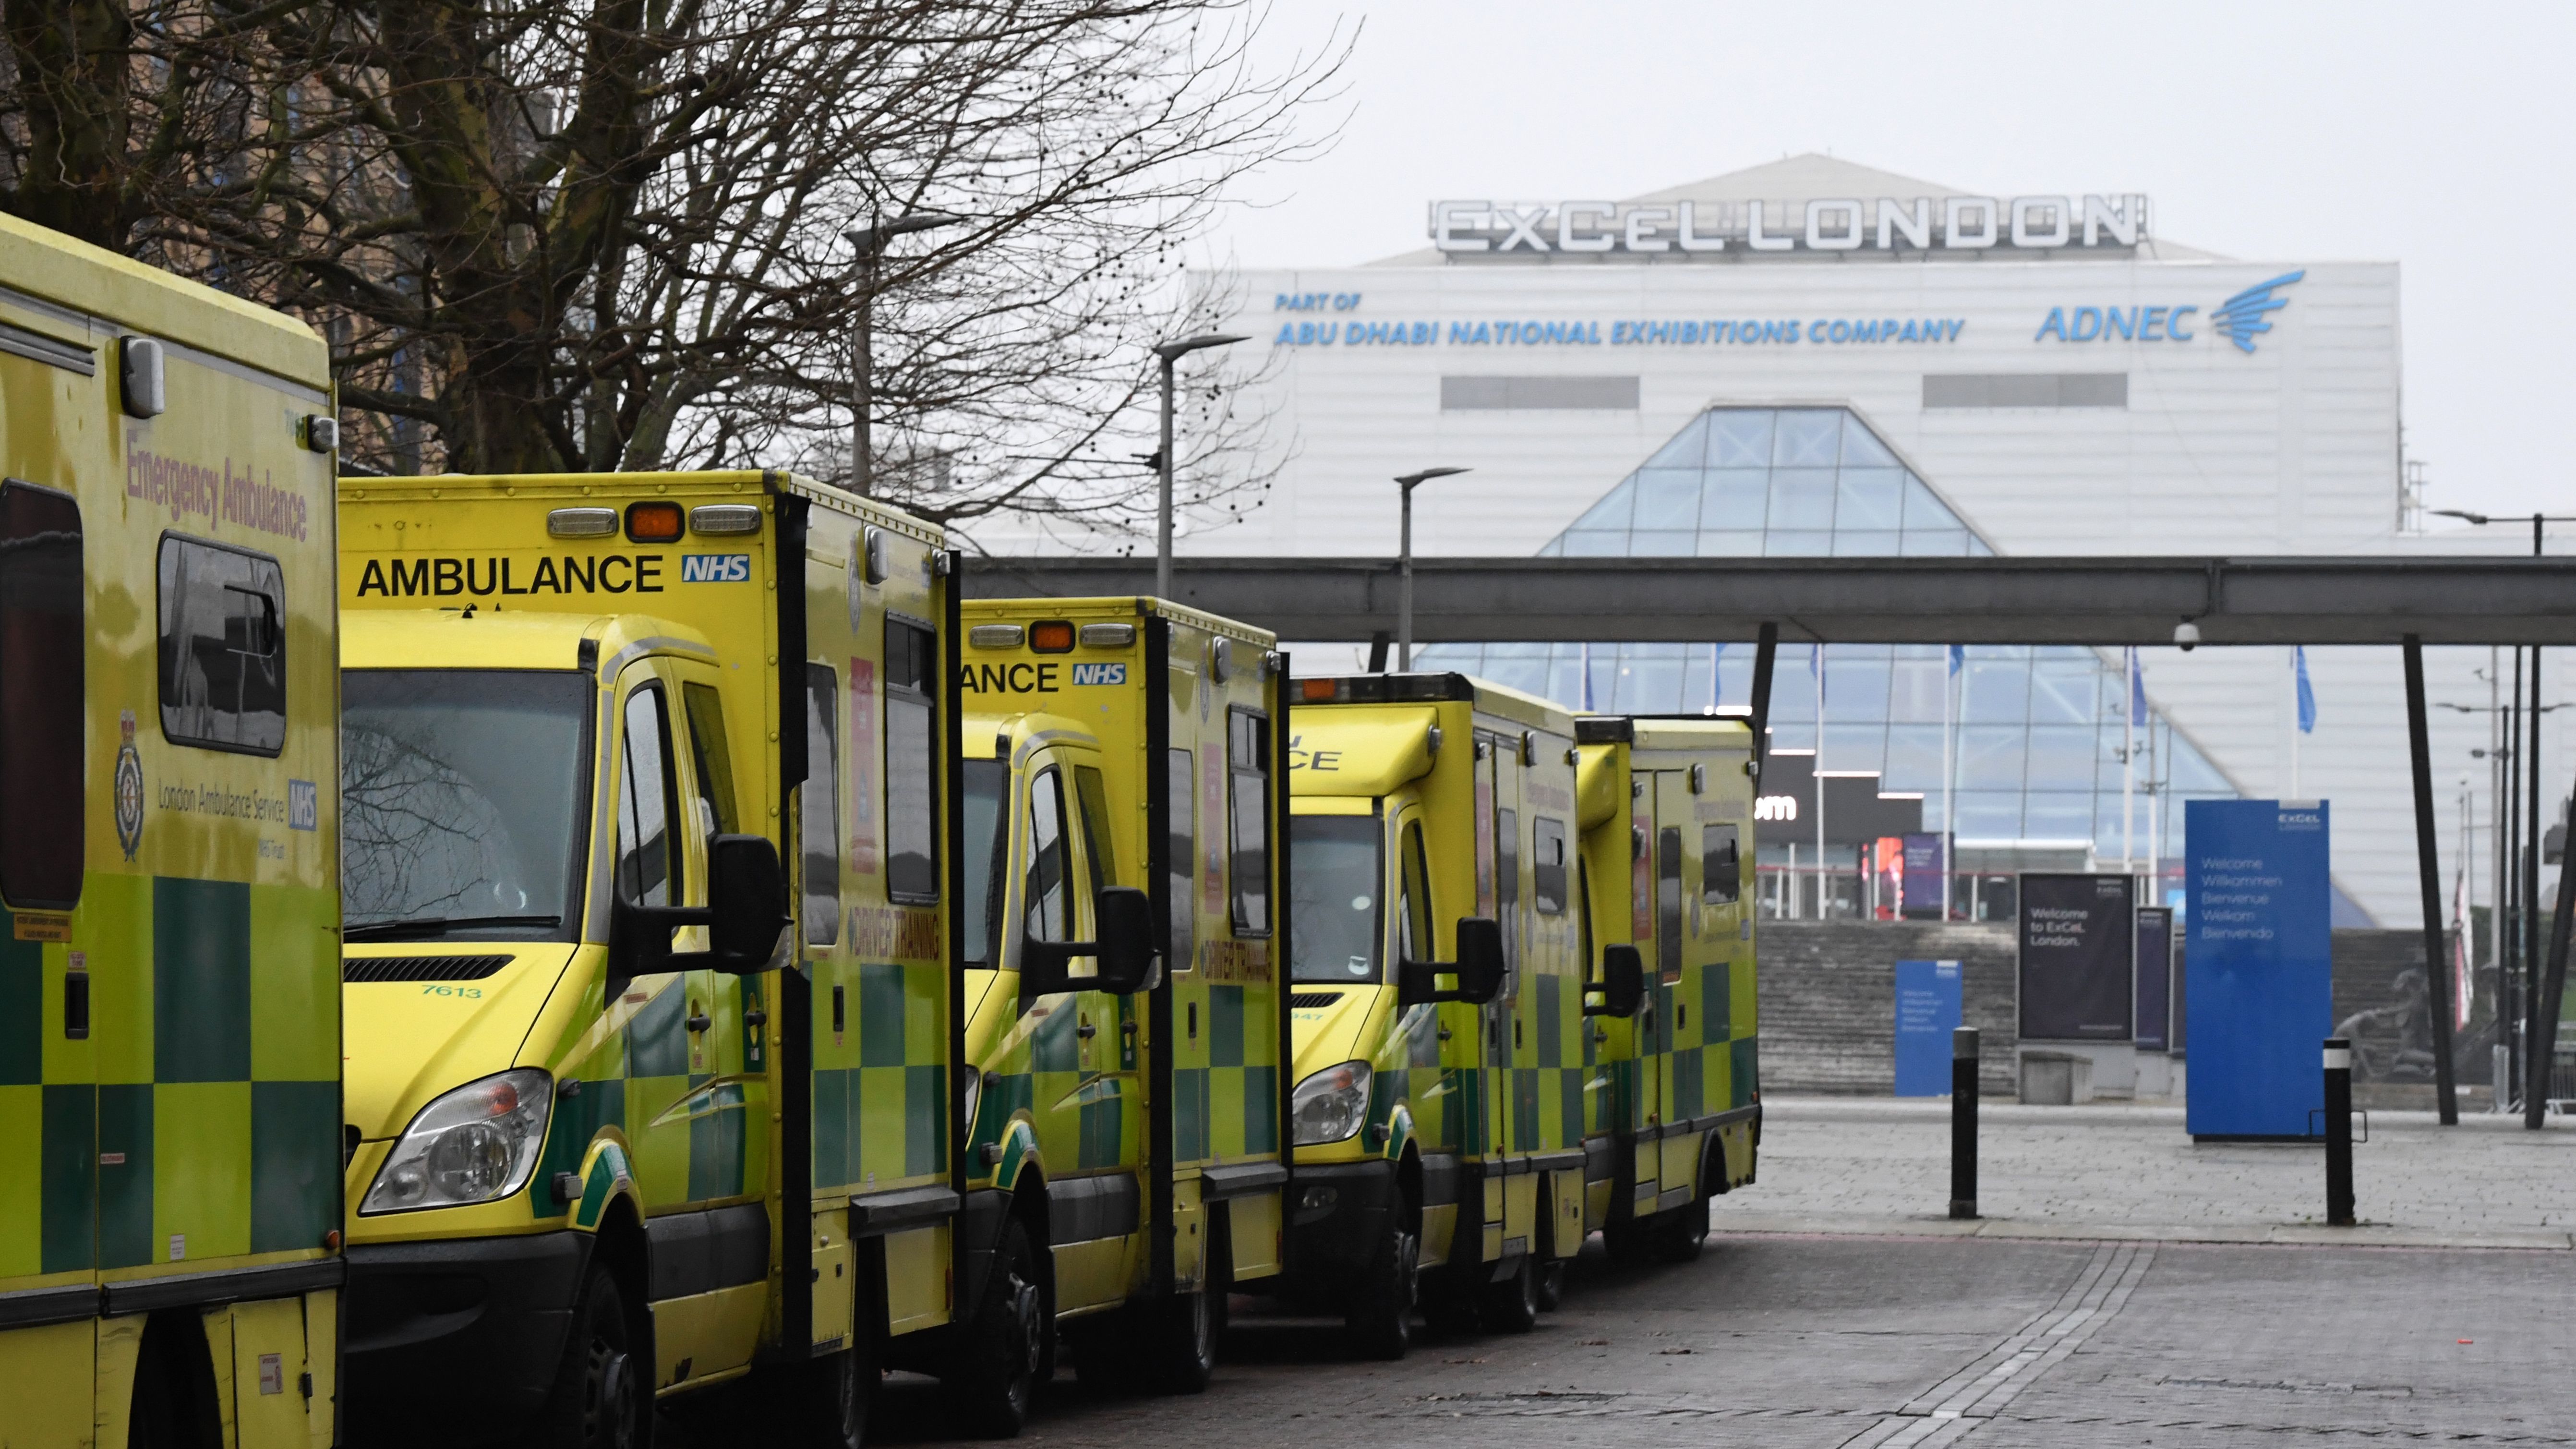 Ambulances are parked outside the NHS Nightingale hospital at the ExCeL center in east London on Friday. Hospitals in the U.K. are preparing for an influx of patients as the coronavirus continues to spread. CREDIT: Daniel Leal-Olivas/AFP via Getty Images